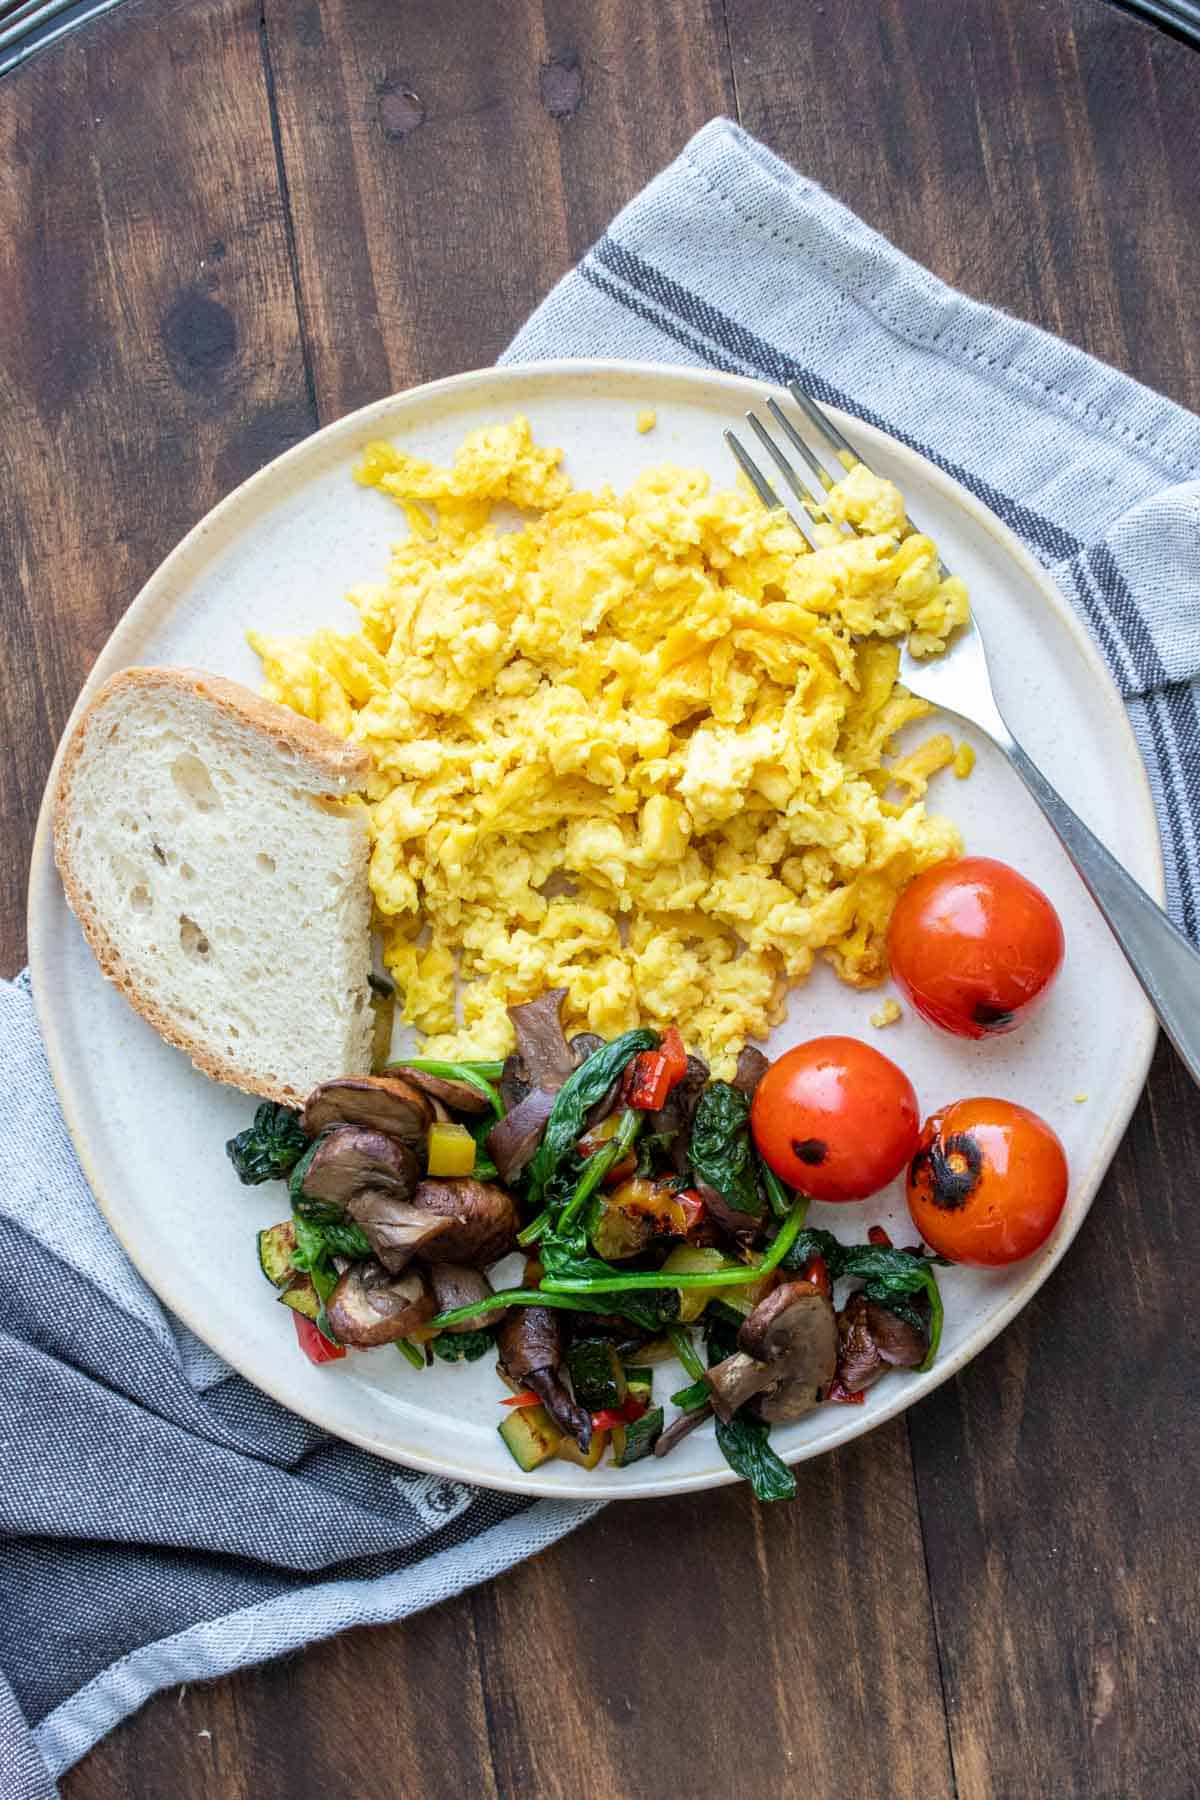 Cream plate with scrambled eggs, veggies and a piece of bread